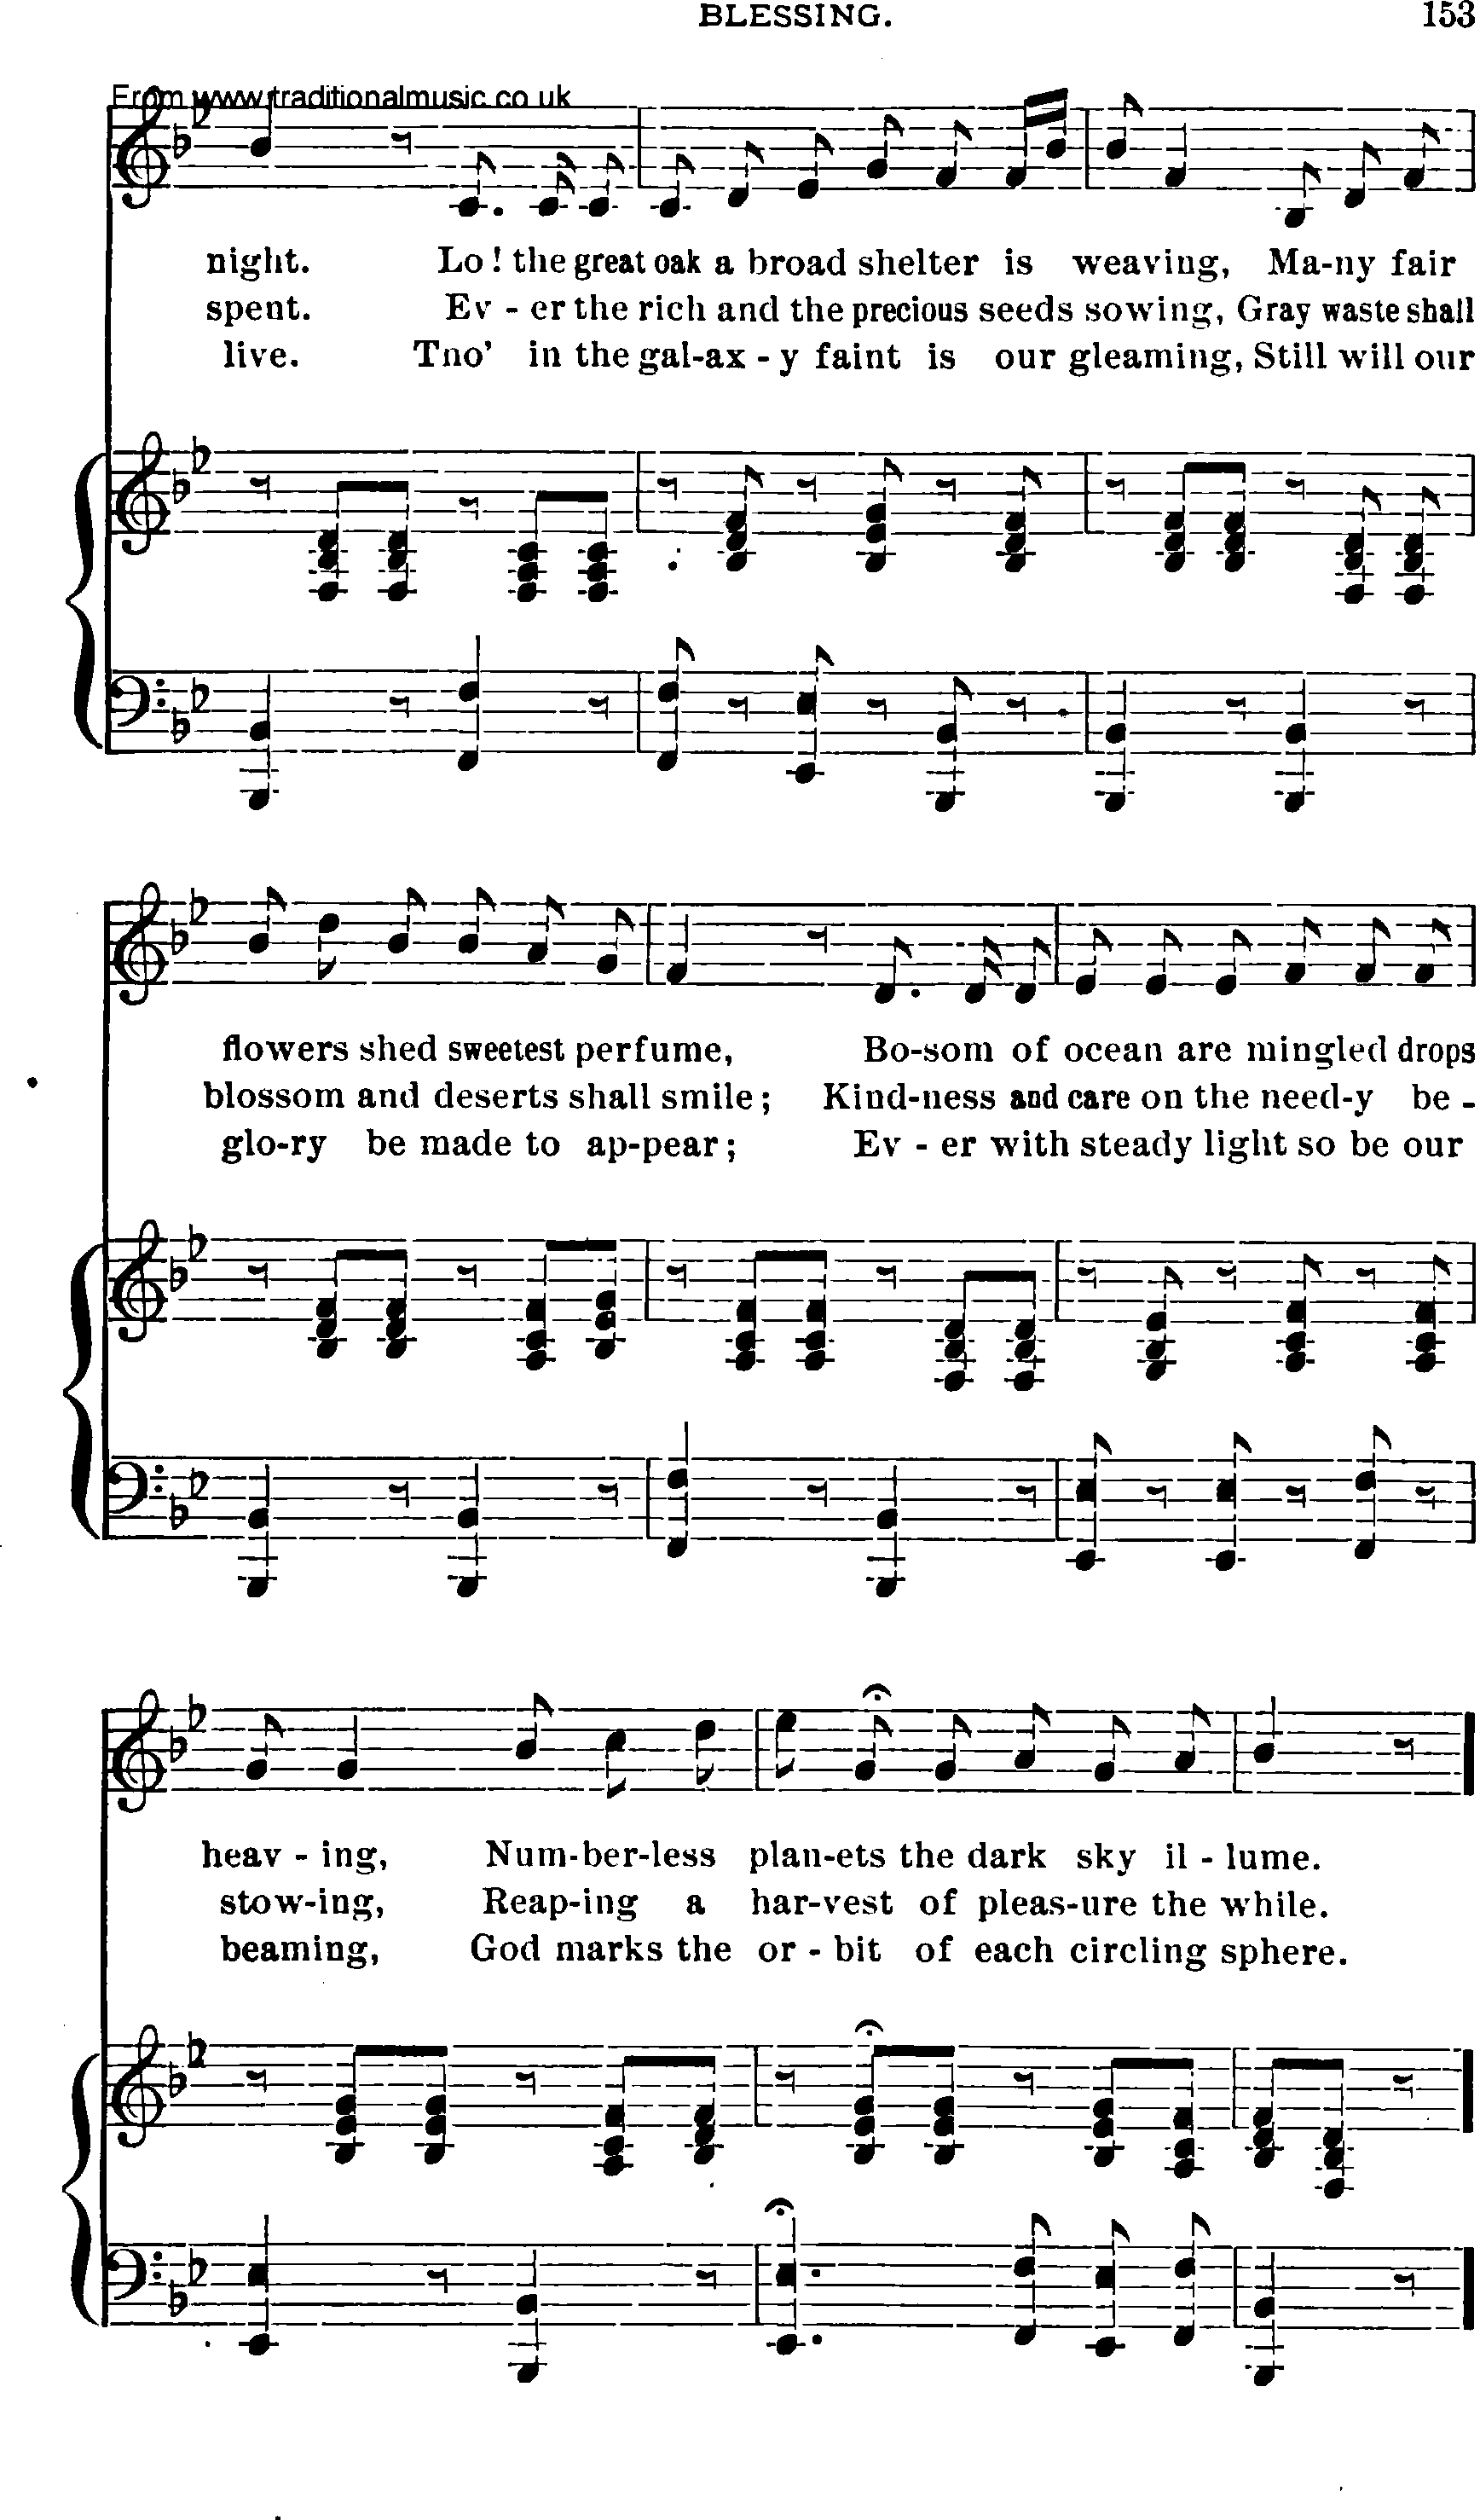 Shaker Music collection, Hymn: blessing, sheetmusic and PDF